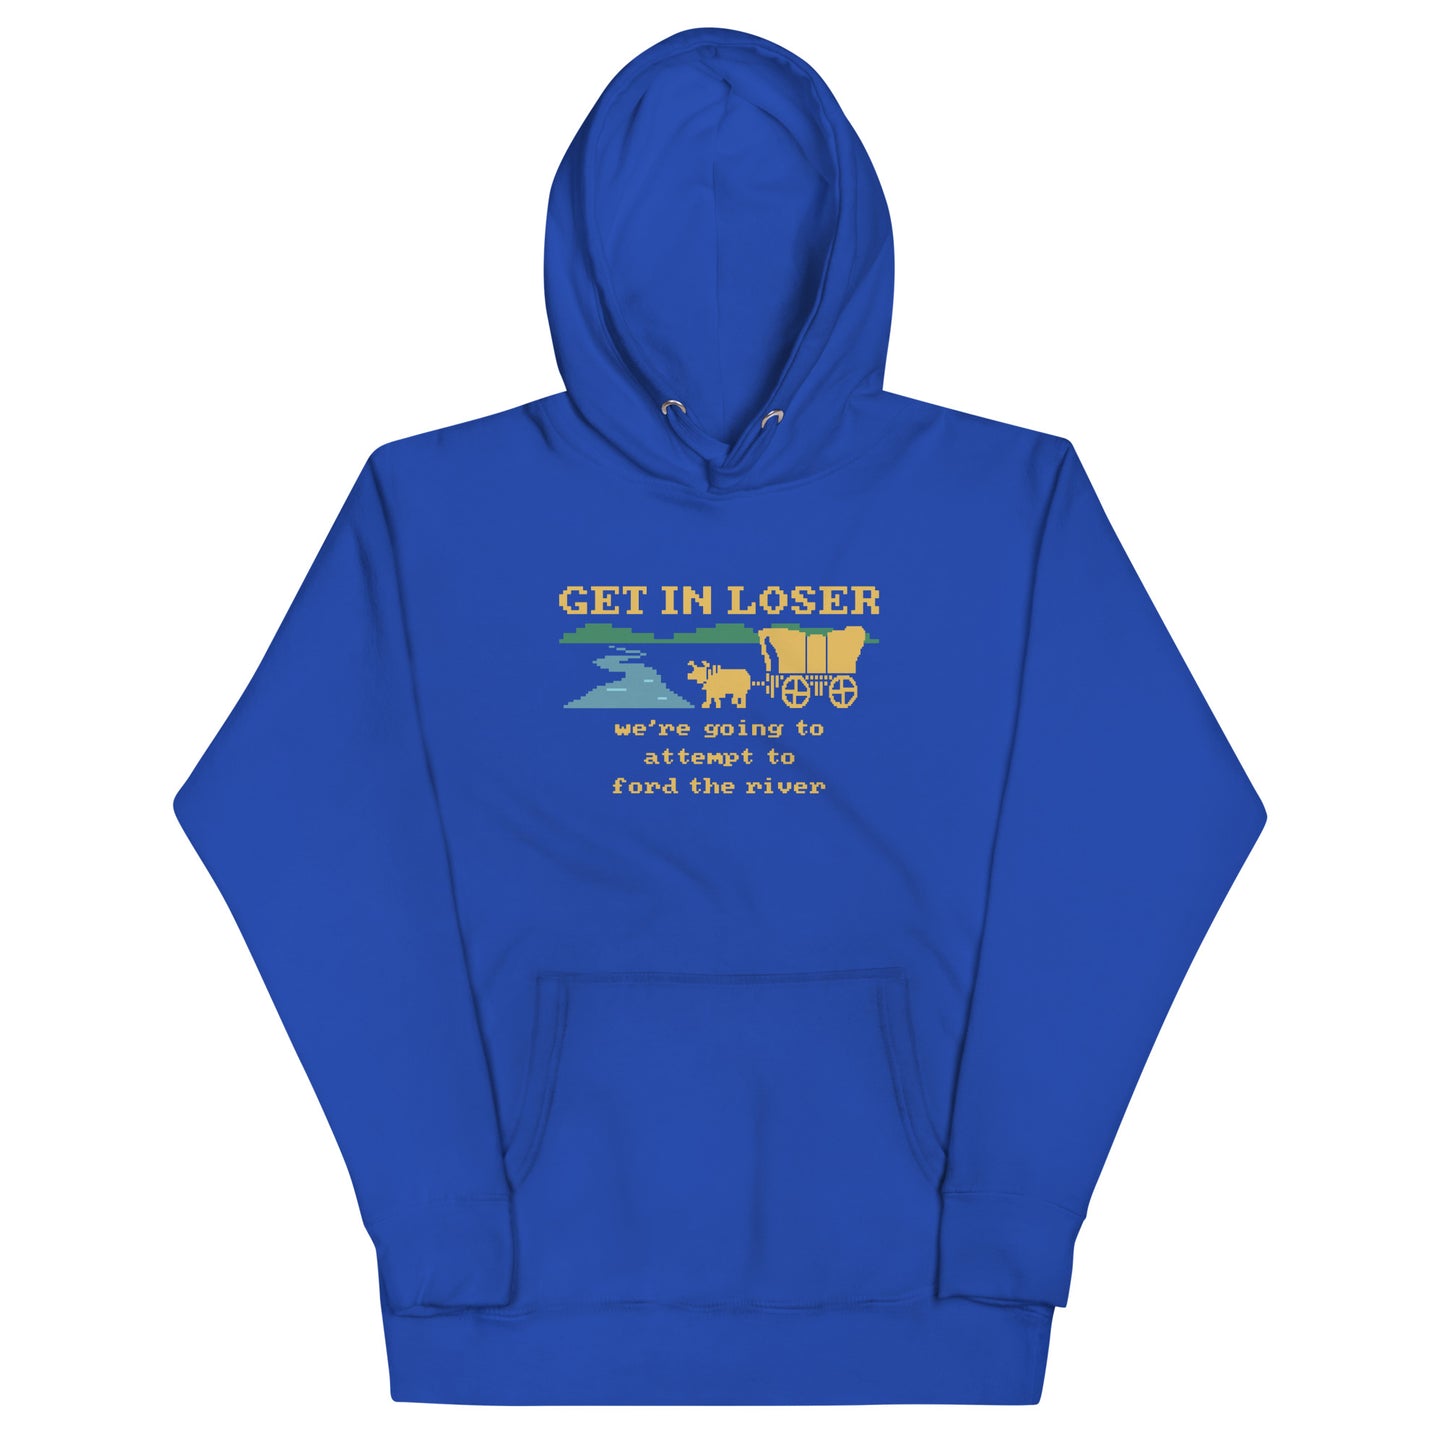 Get In Loser We're Going To Attempt To Ford The River Unisex Hoodie